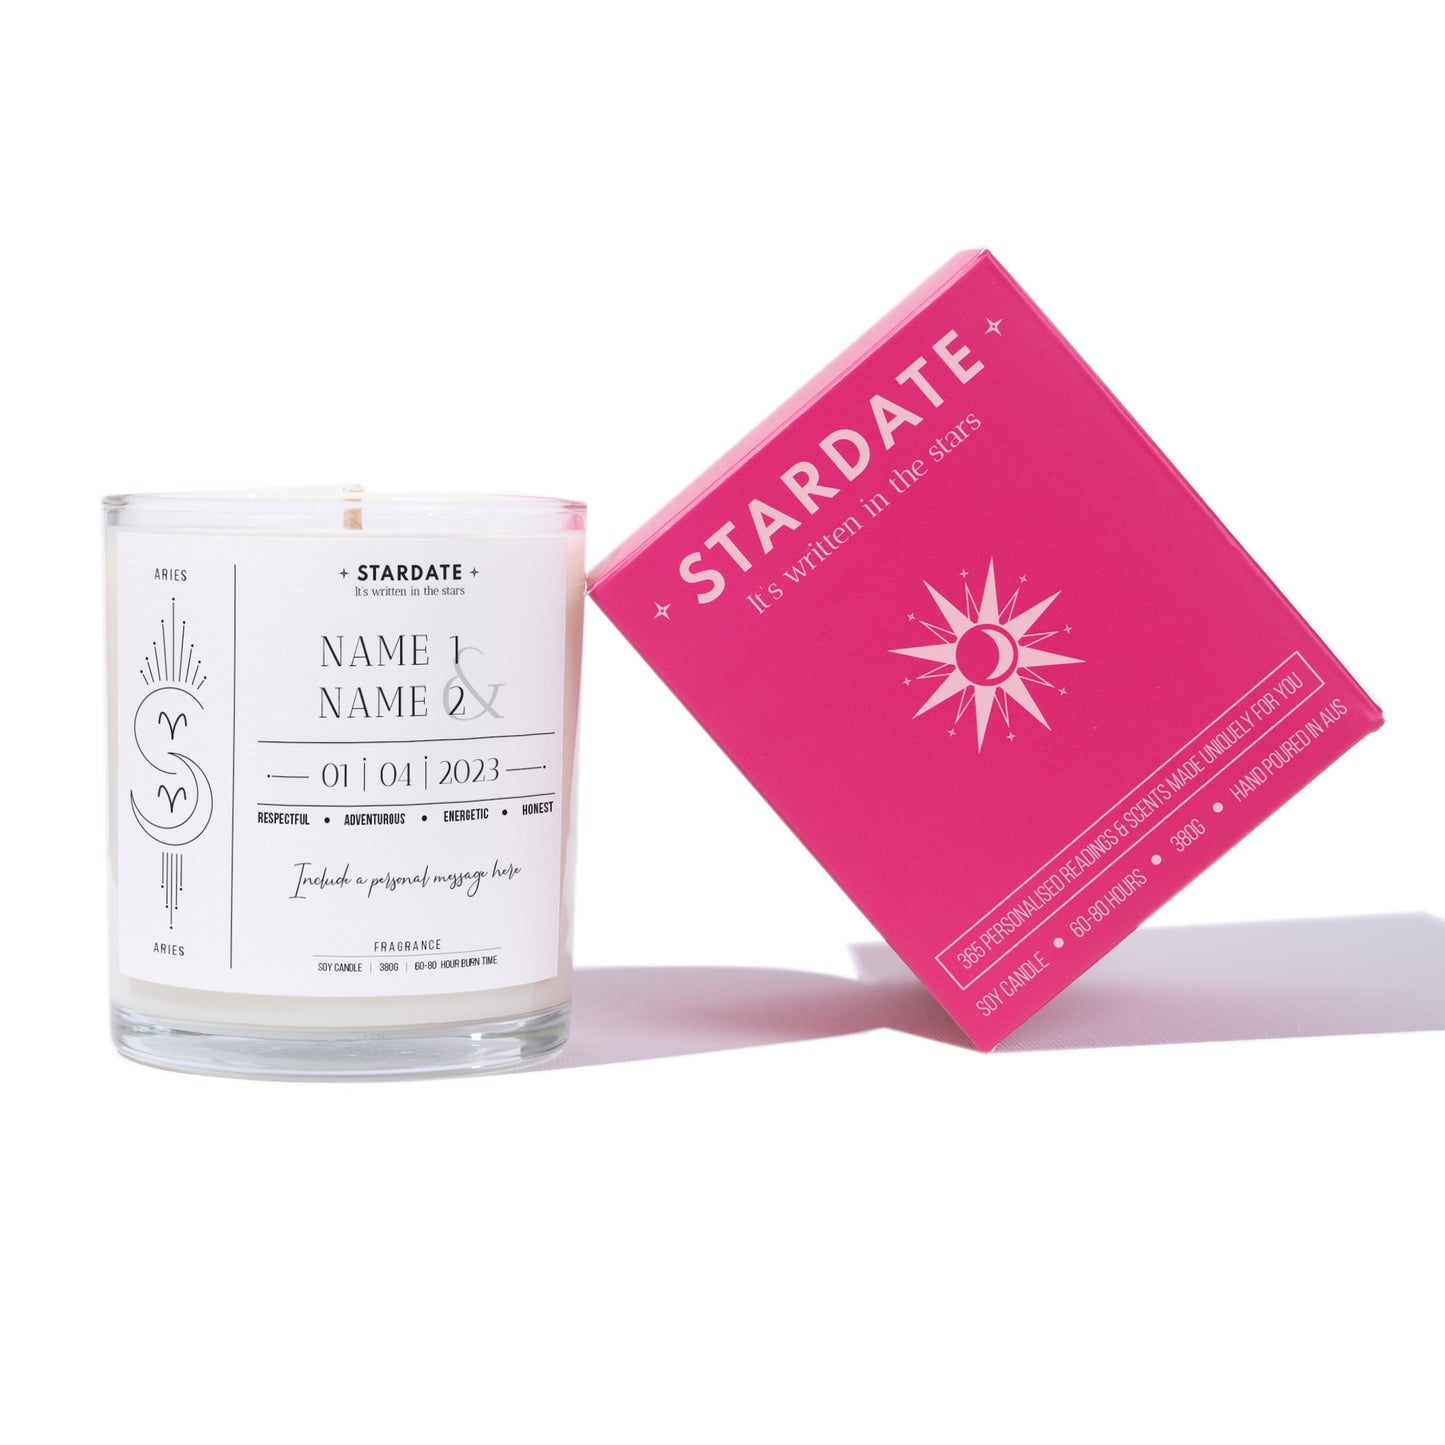 Aries and Scorpio Compatibility Candle